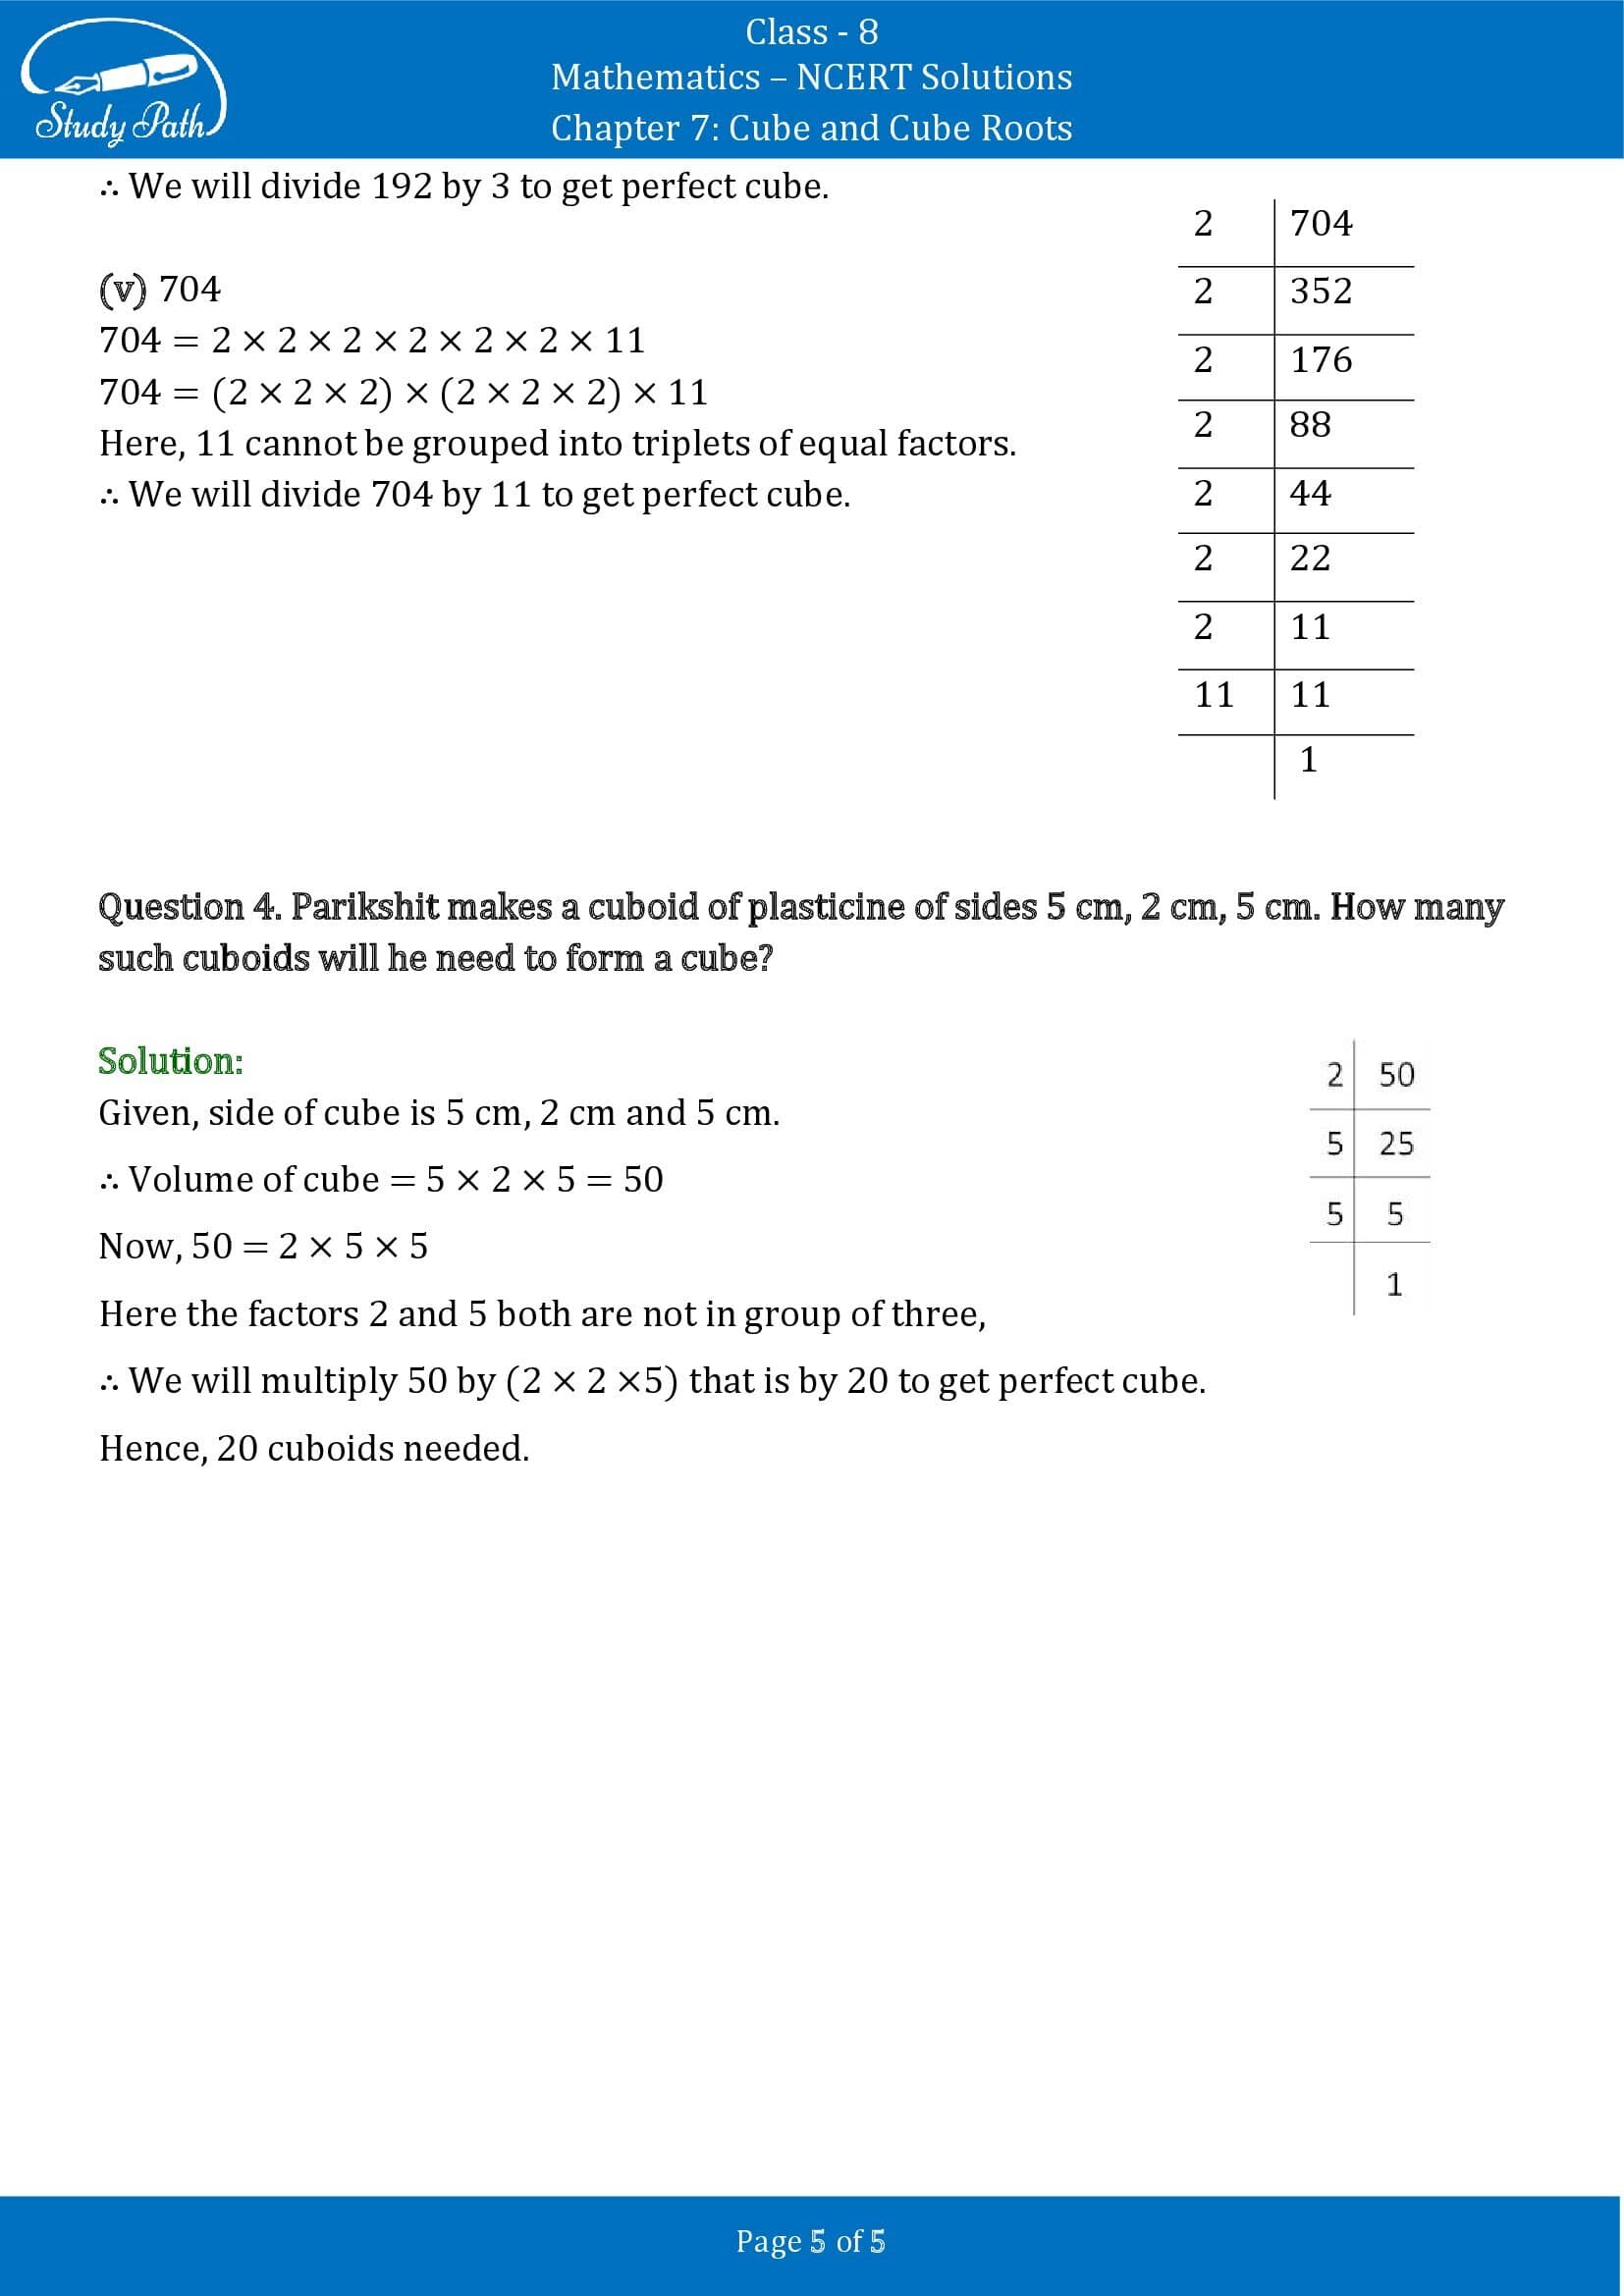 NCERT Solutions for Class 8 Maths Chapter 7 Cube and Cube Roots Exercise 7.1 00005